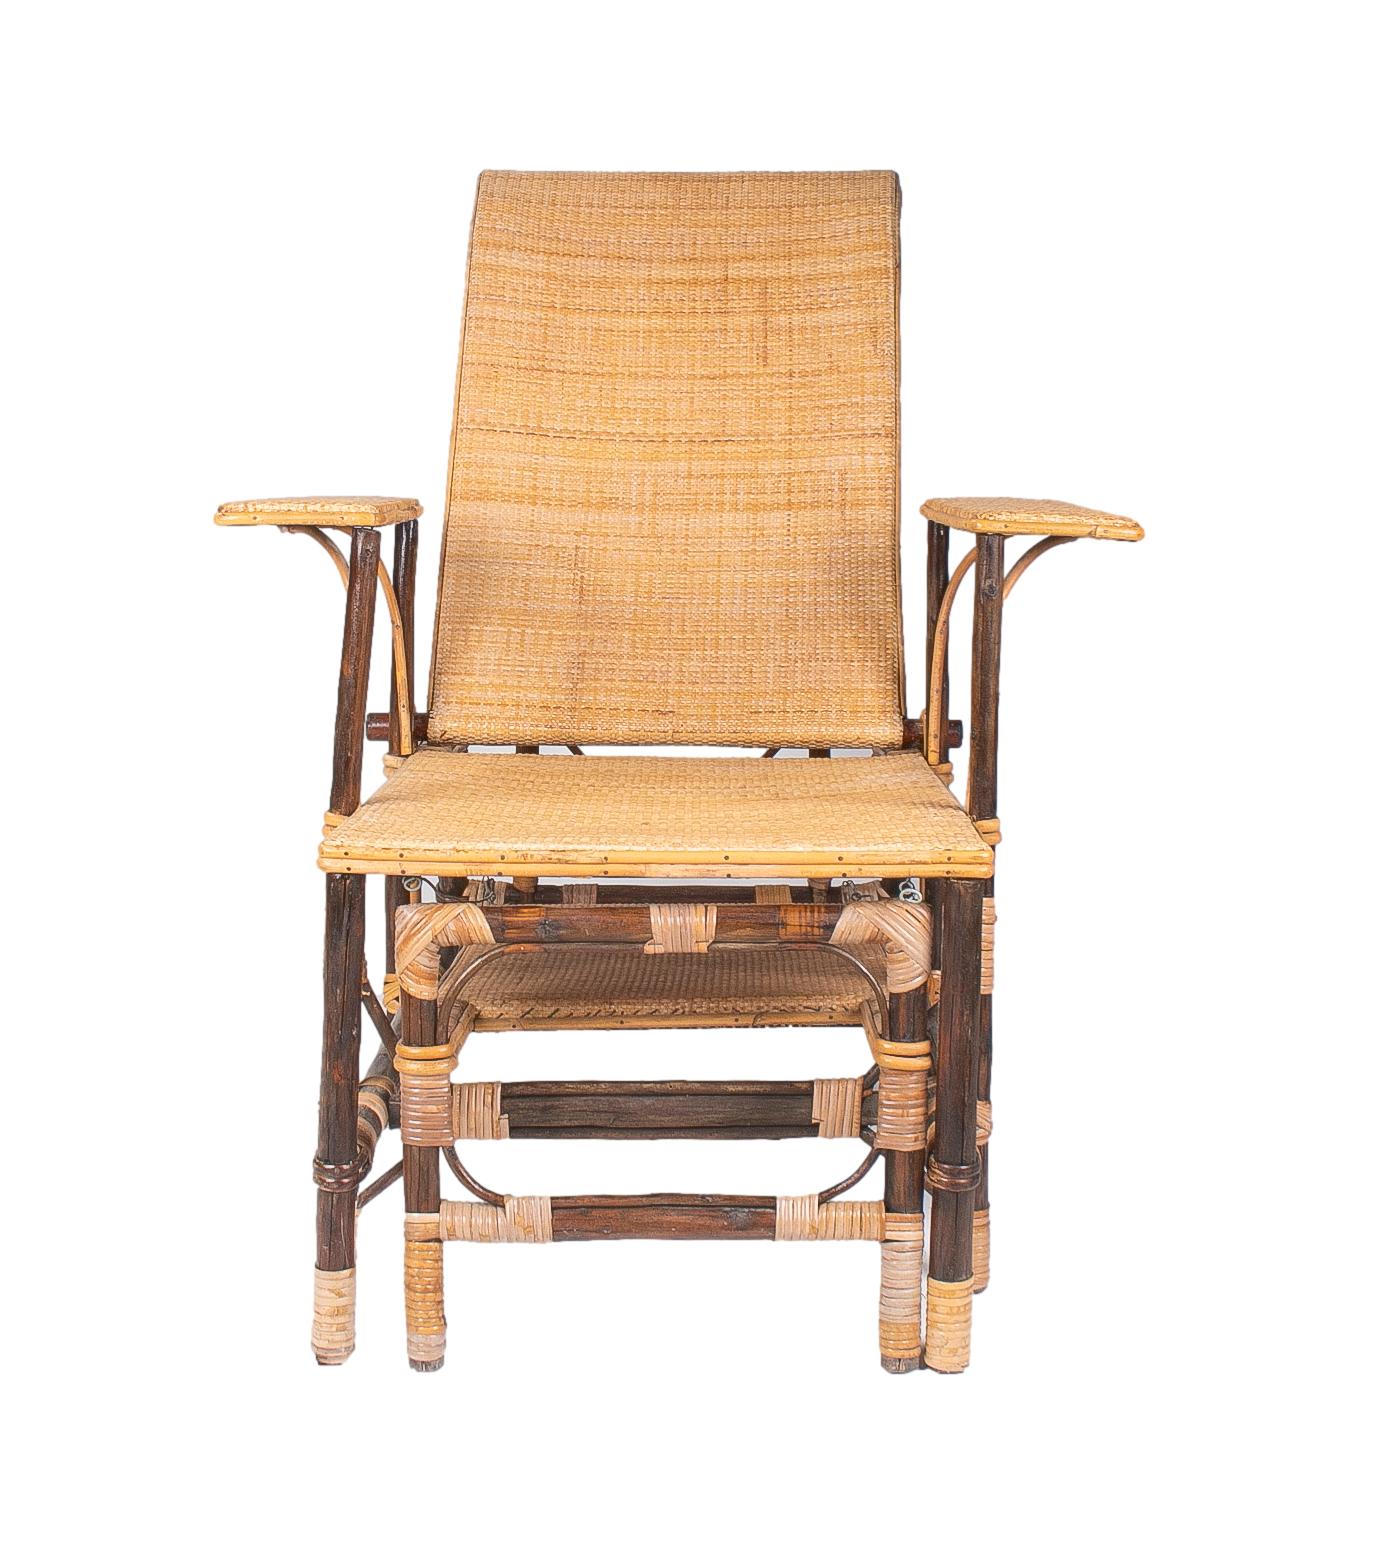 1980s Spanish Woven Wicker & Bamboo Sunbathing Lounge Chair In Good Condition For Sale In Marbella, ES